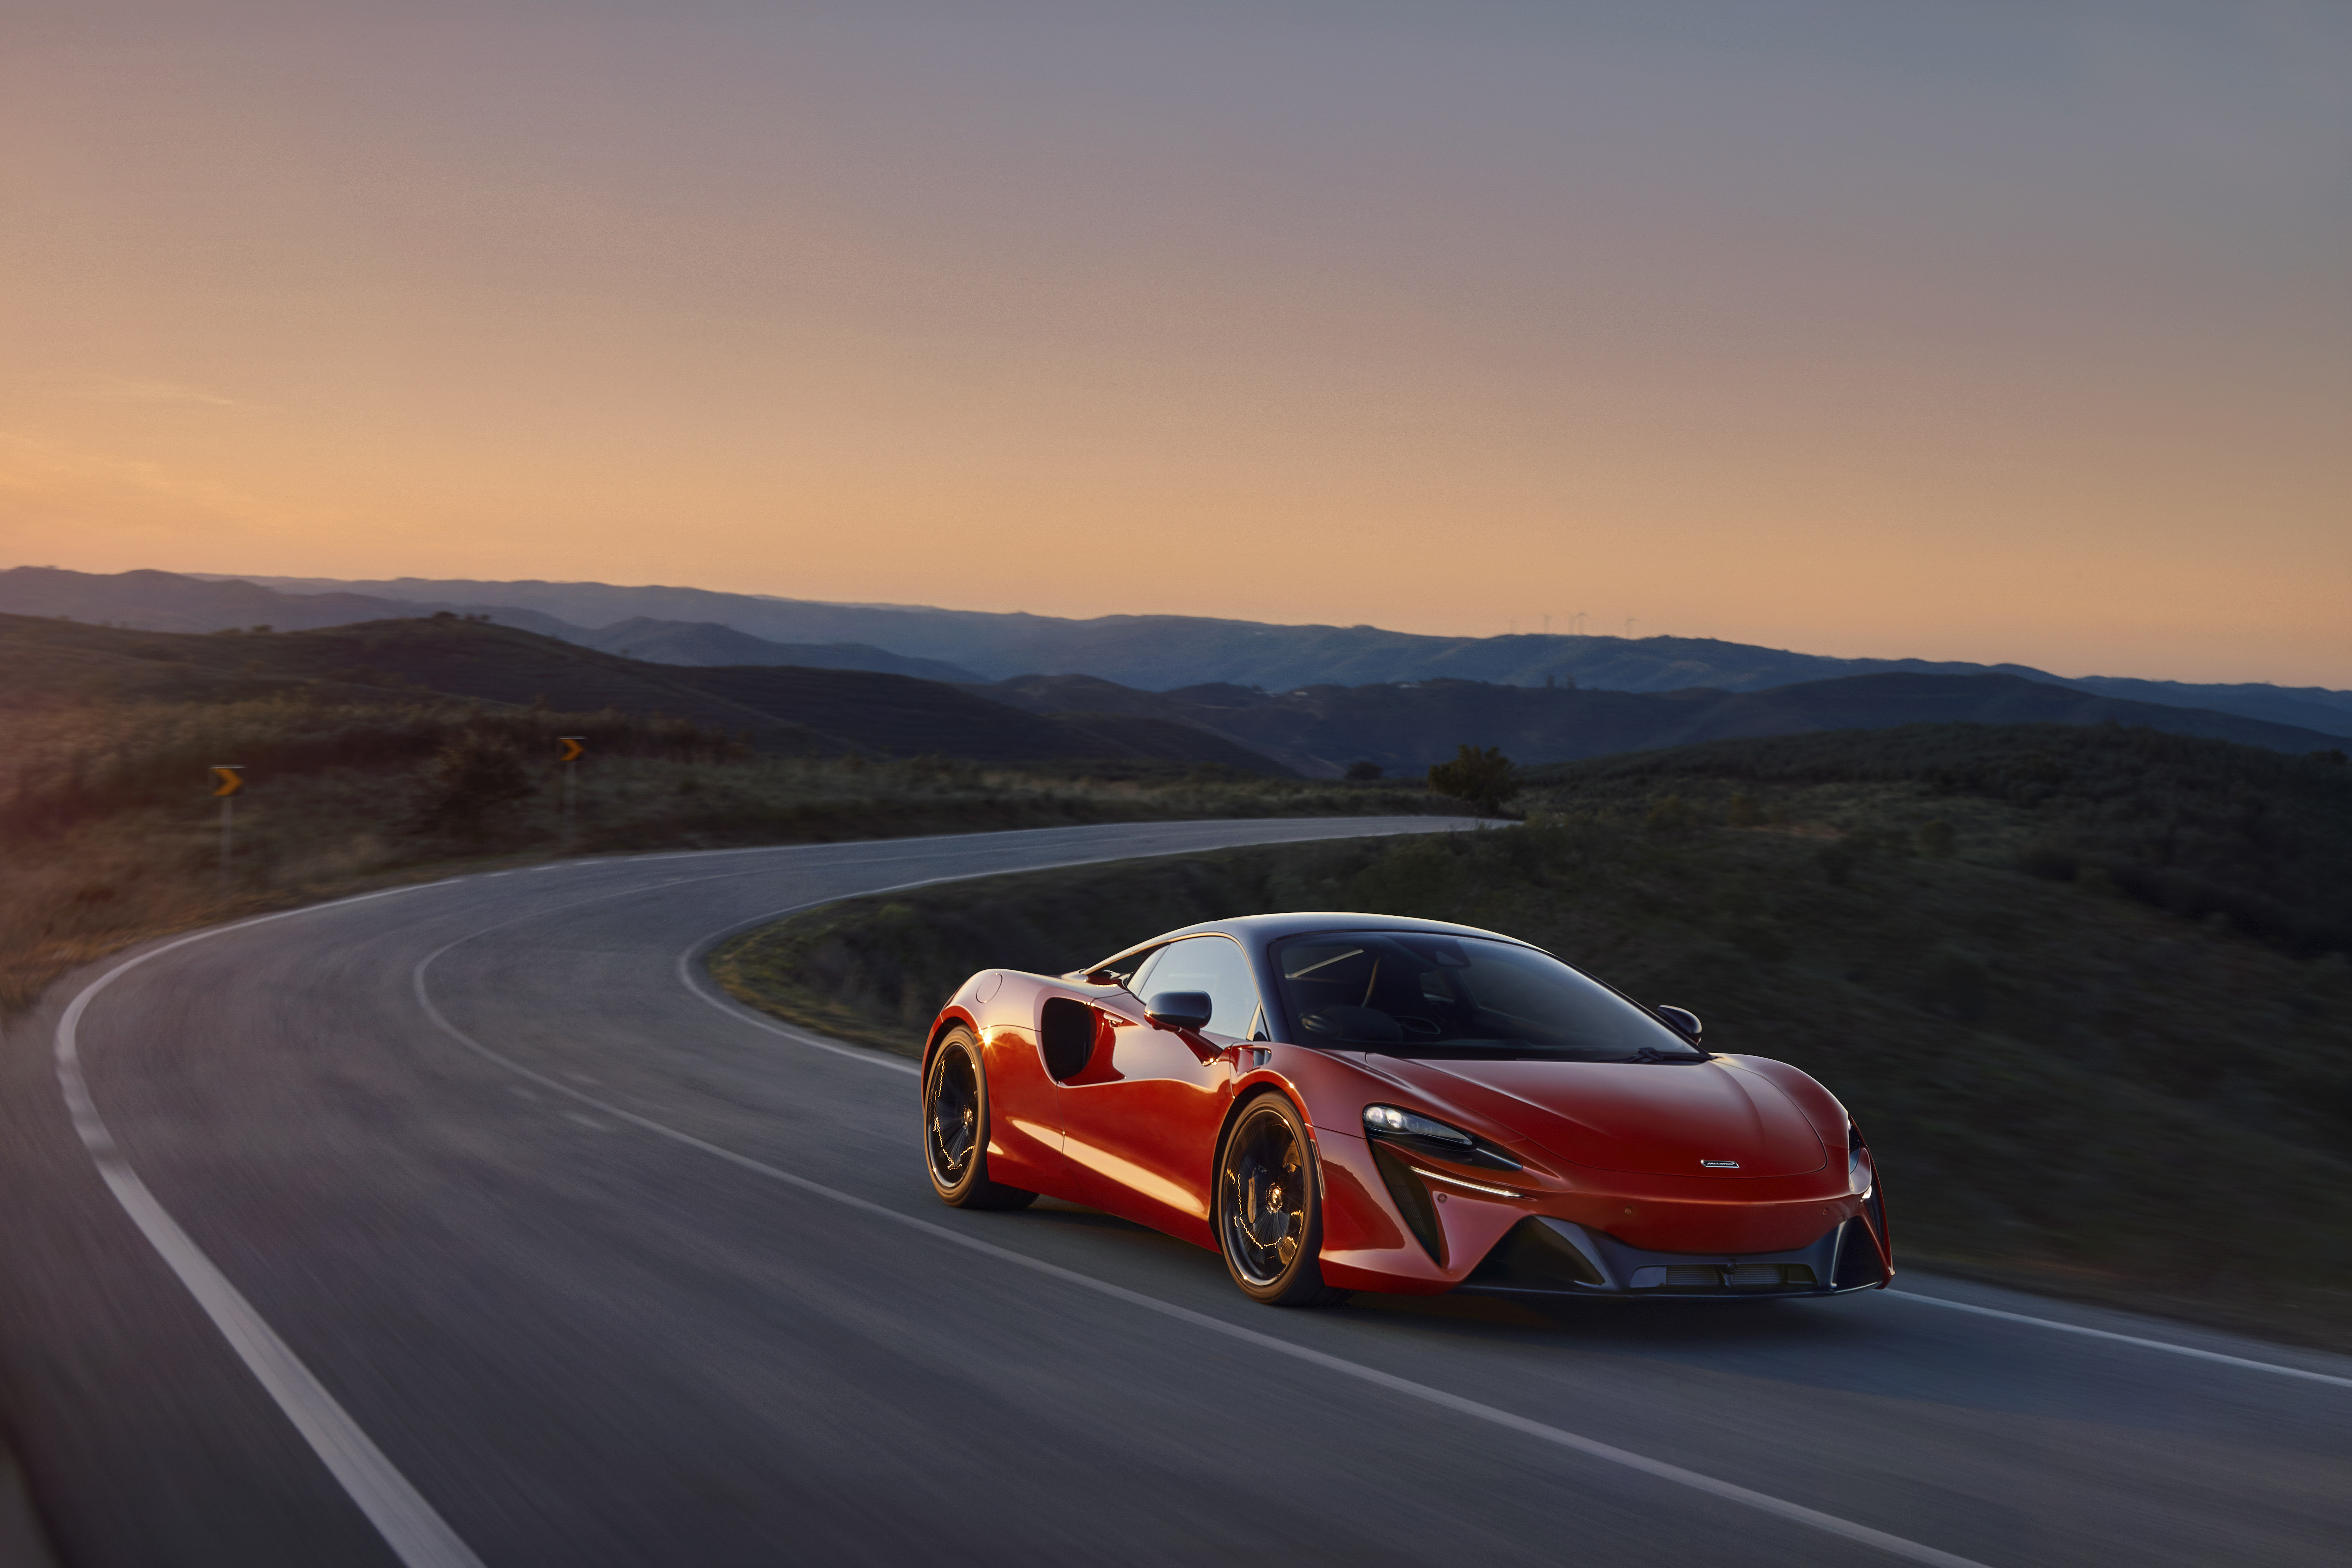 The Mclaren 2021 in red drives at high speed